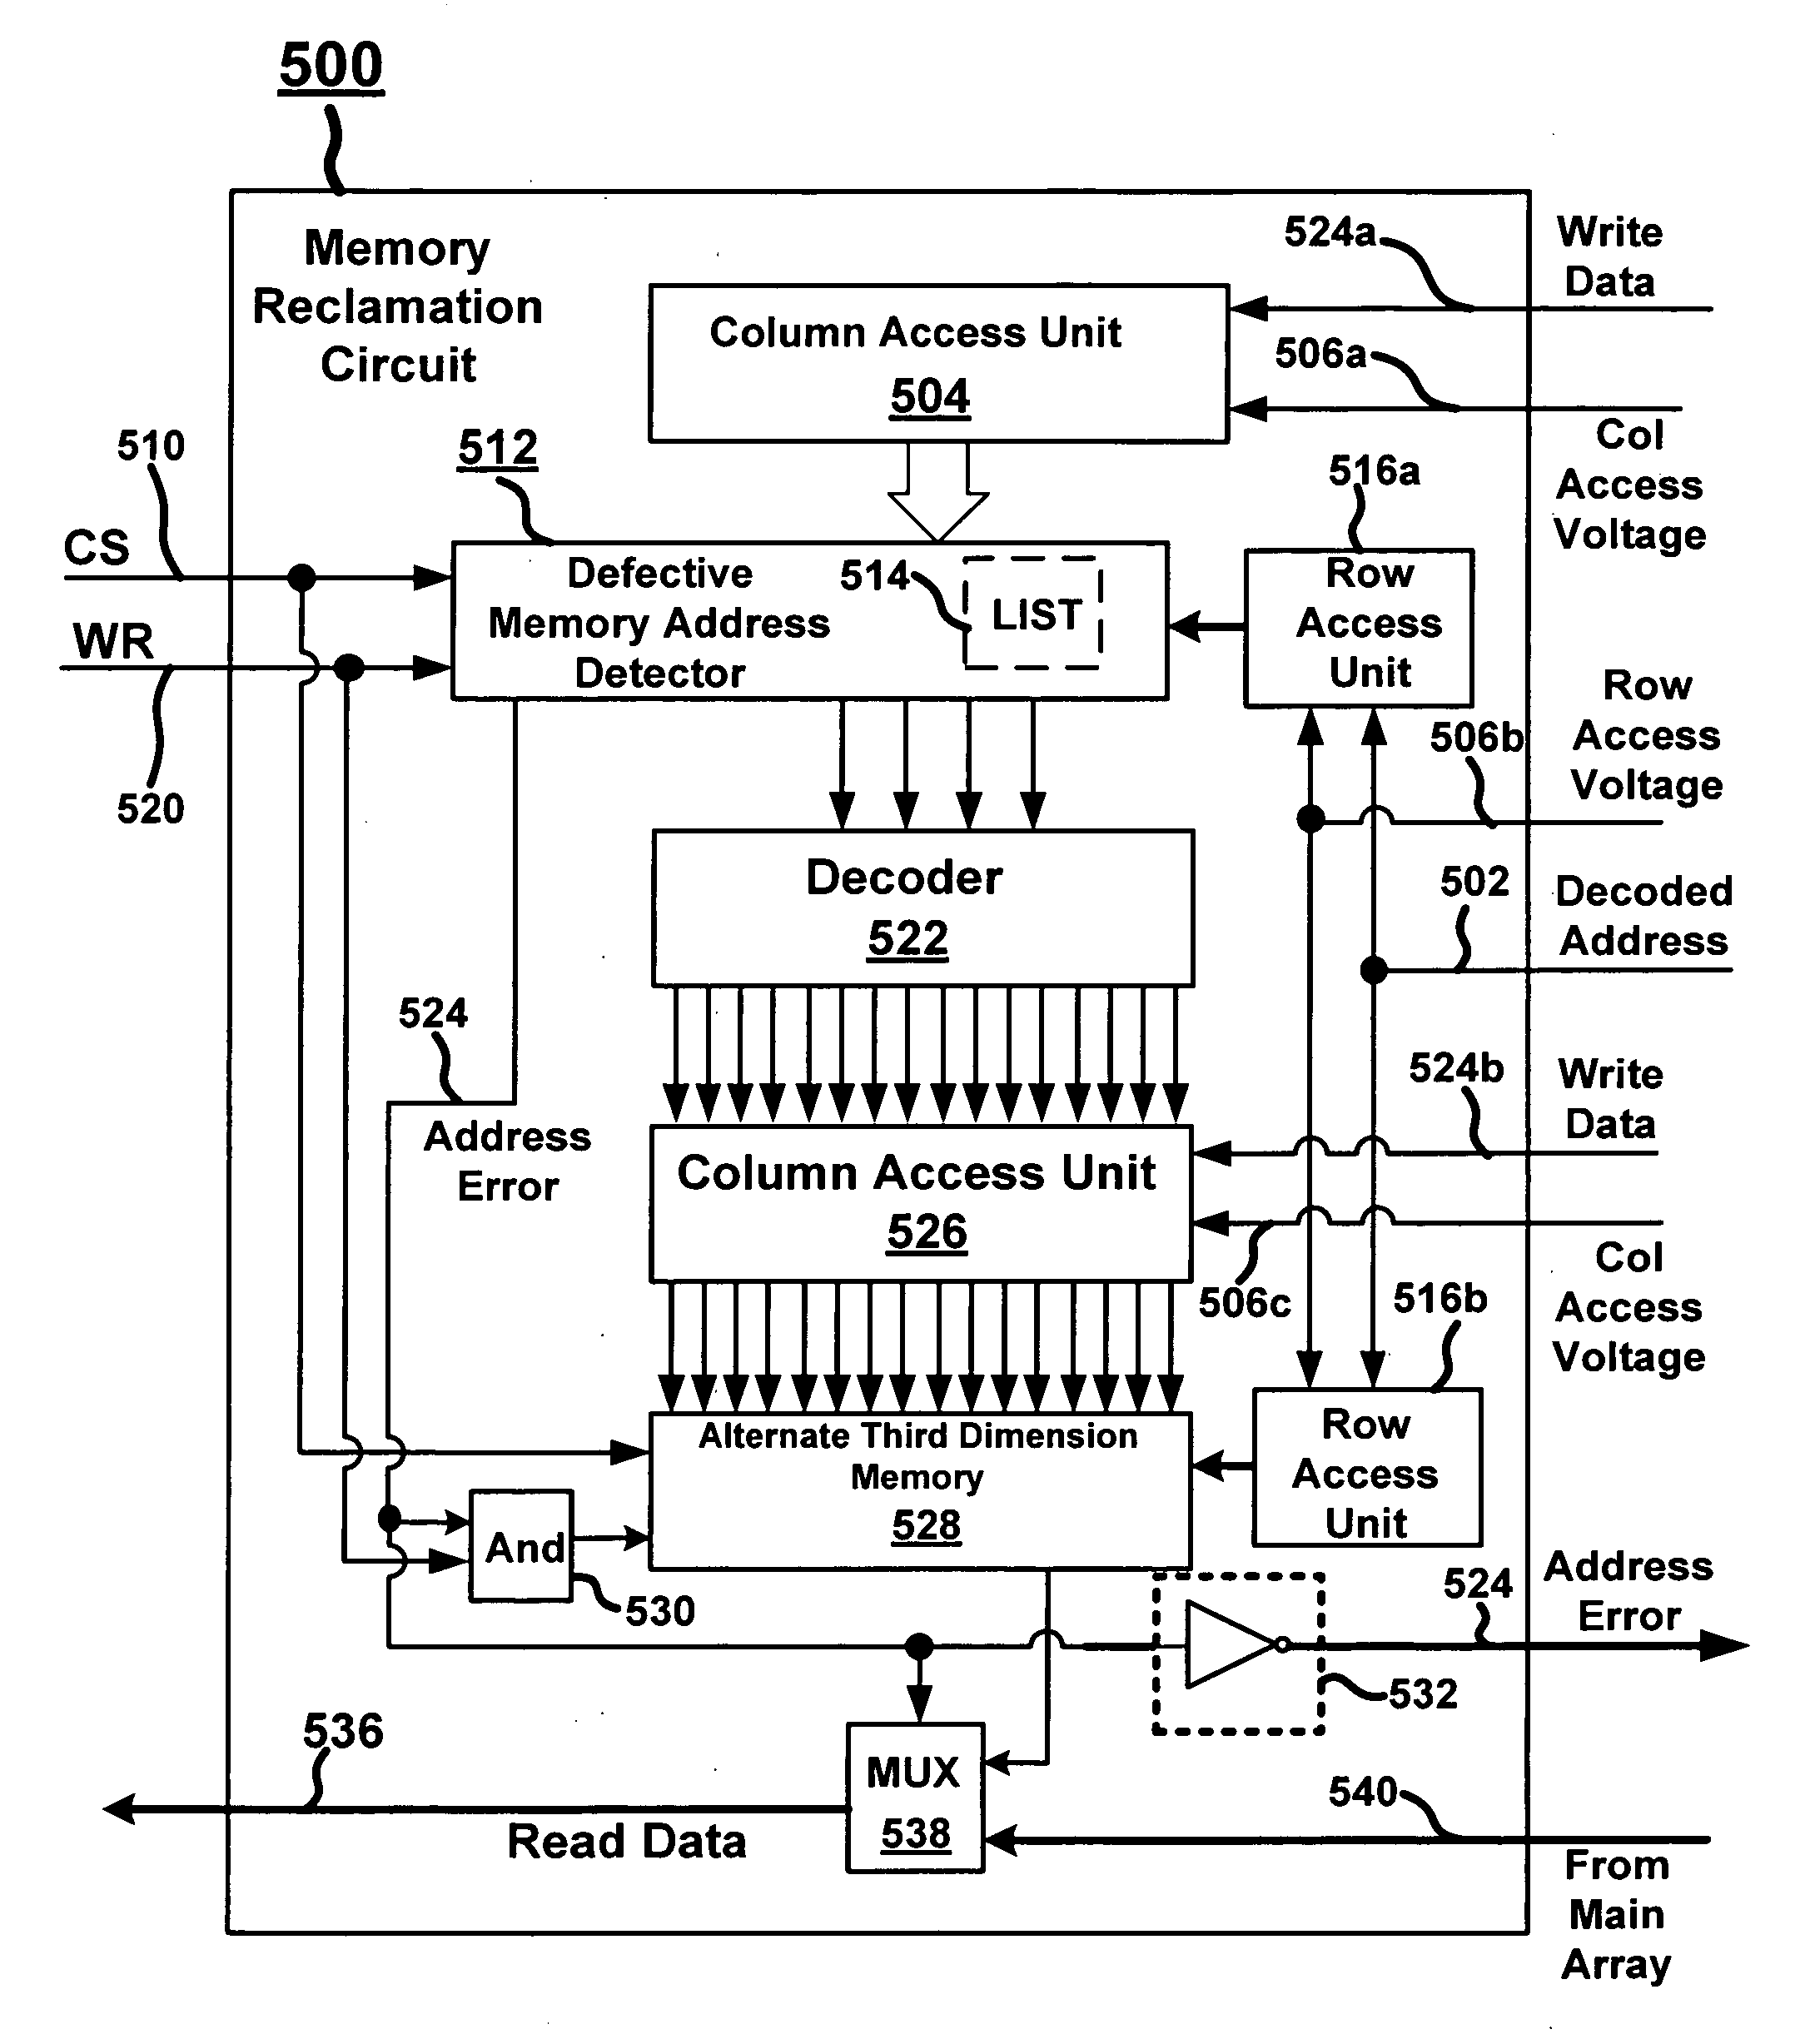 Integrated circuits and methods to compensate for defective memory in multiple layers of memory